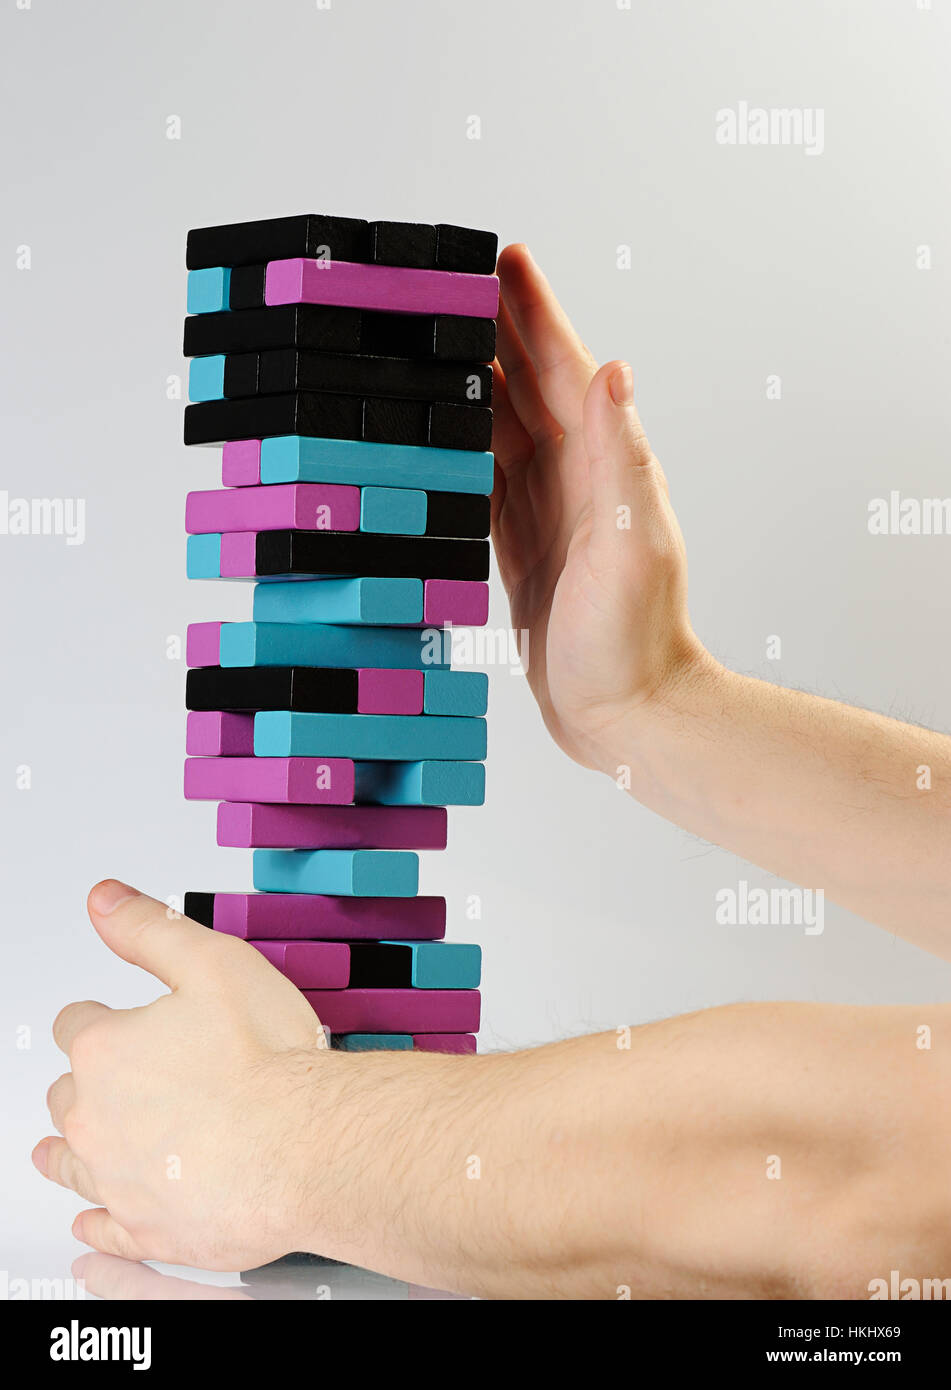 hands hold fall tower color jenga on white Stock Photo